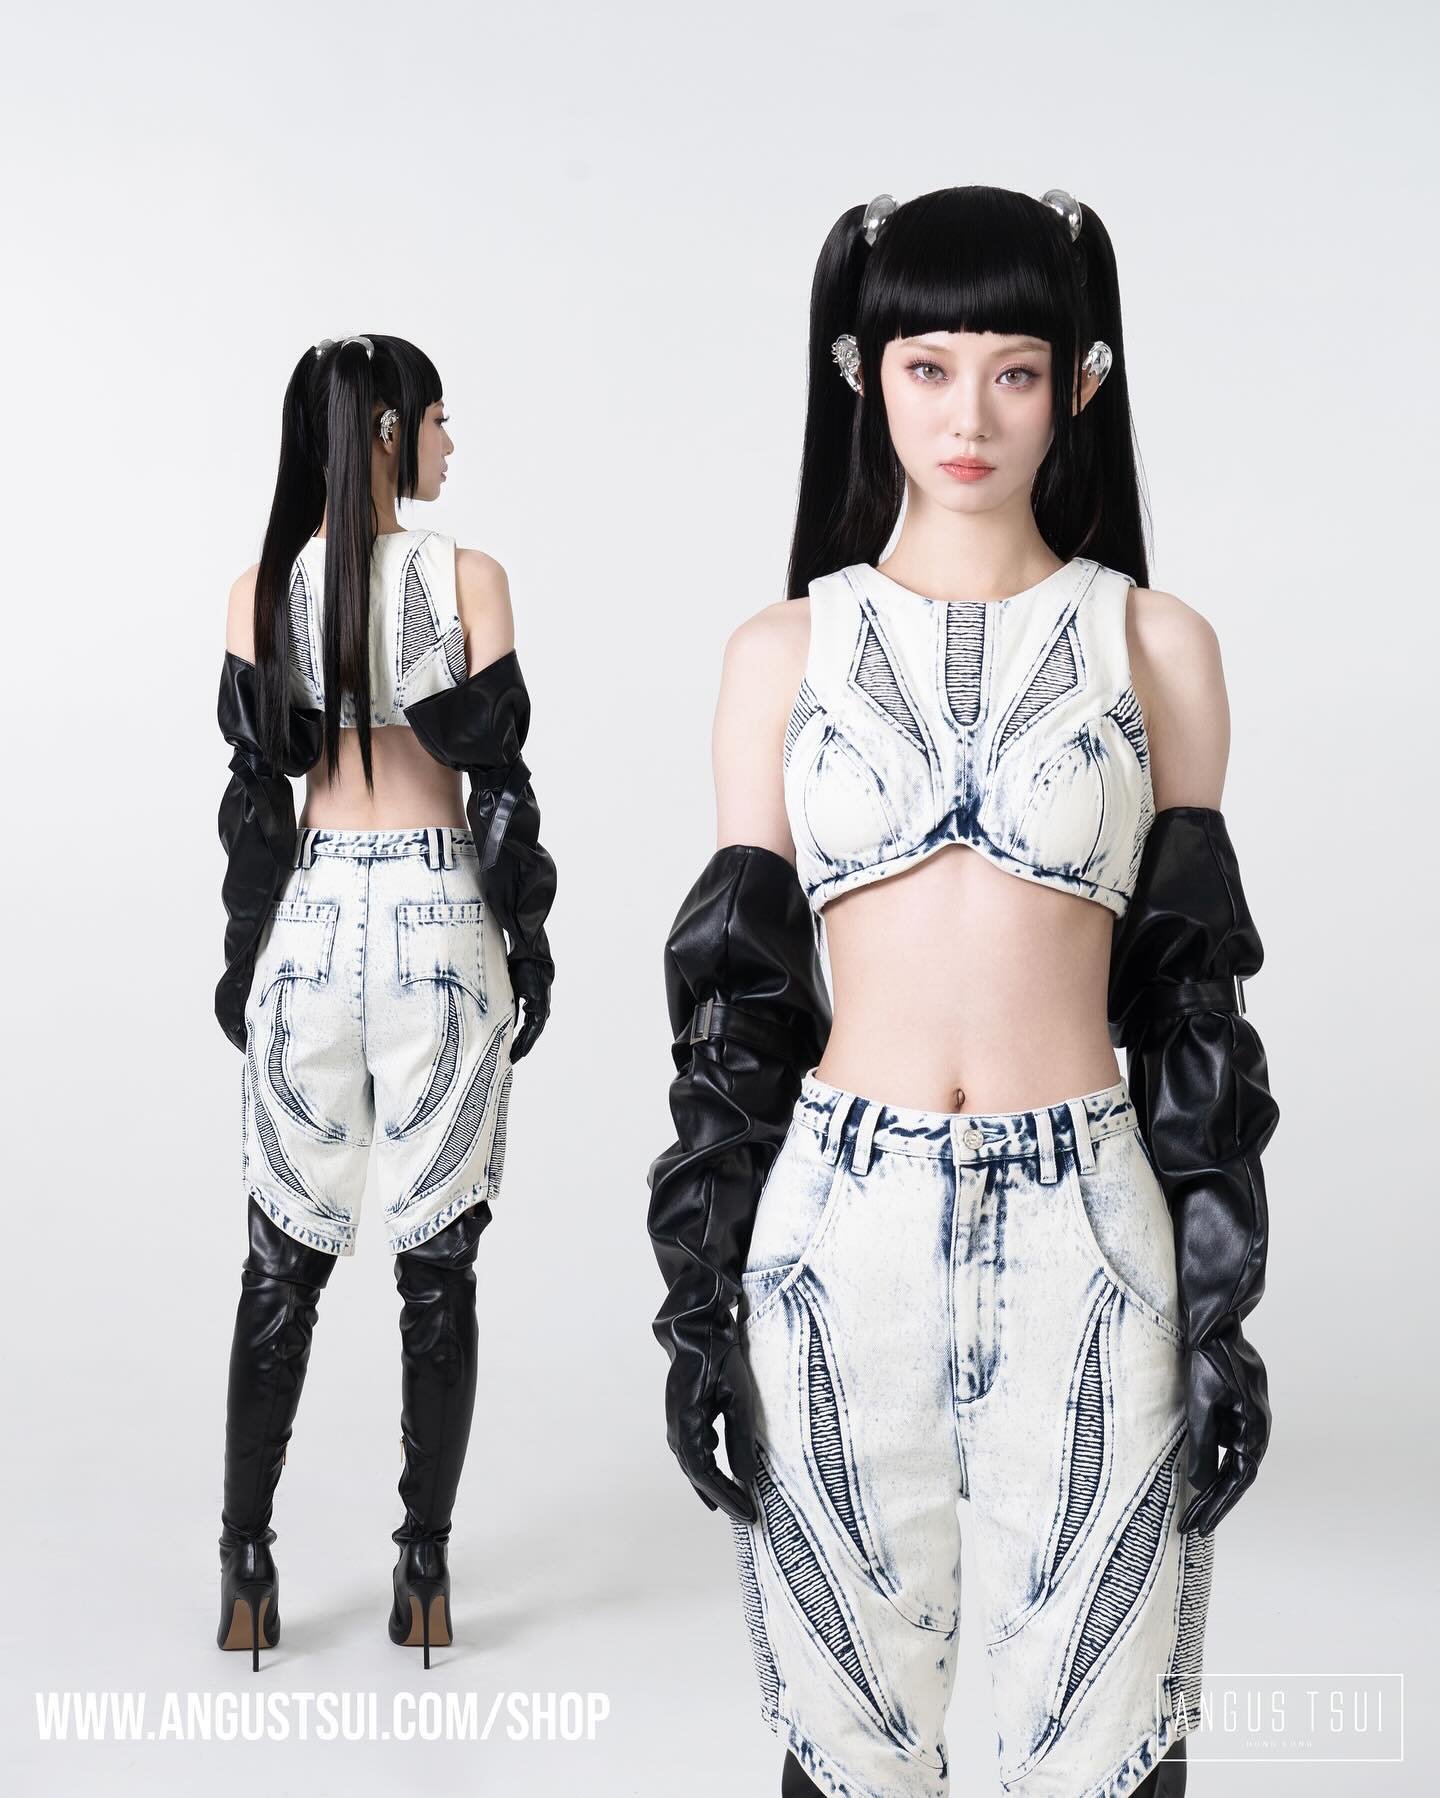 XenoFuturist SS24 - Outerspace Bustier🛸

More on ANGUSTSUI.COM/SHOP . Link in bio
#ANGUSTSUI #XenoFuturist